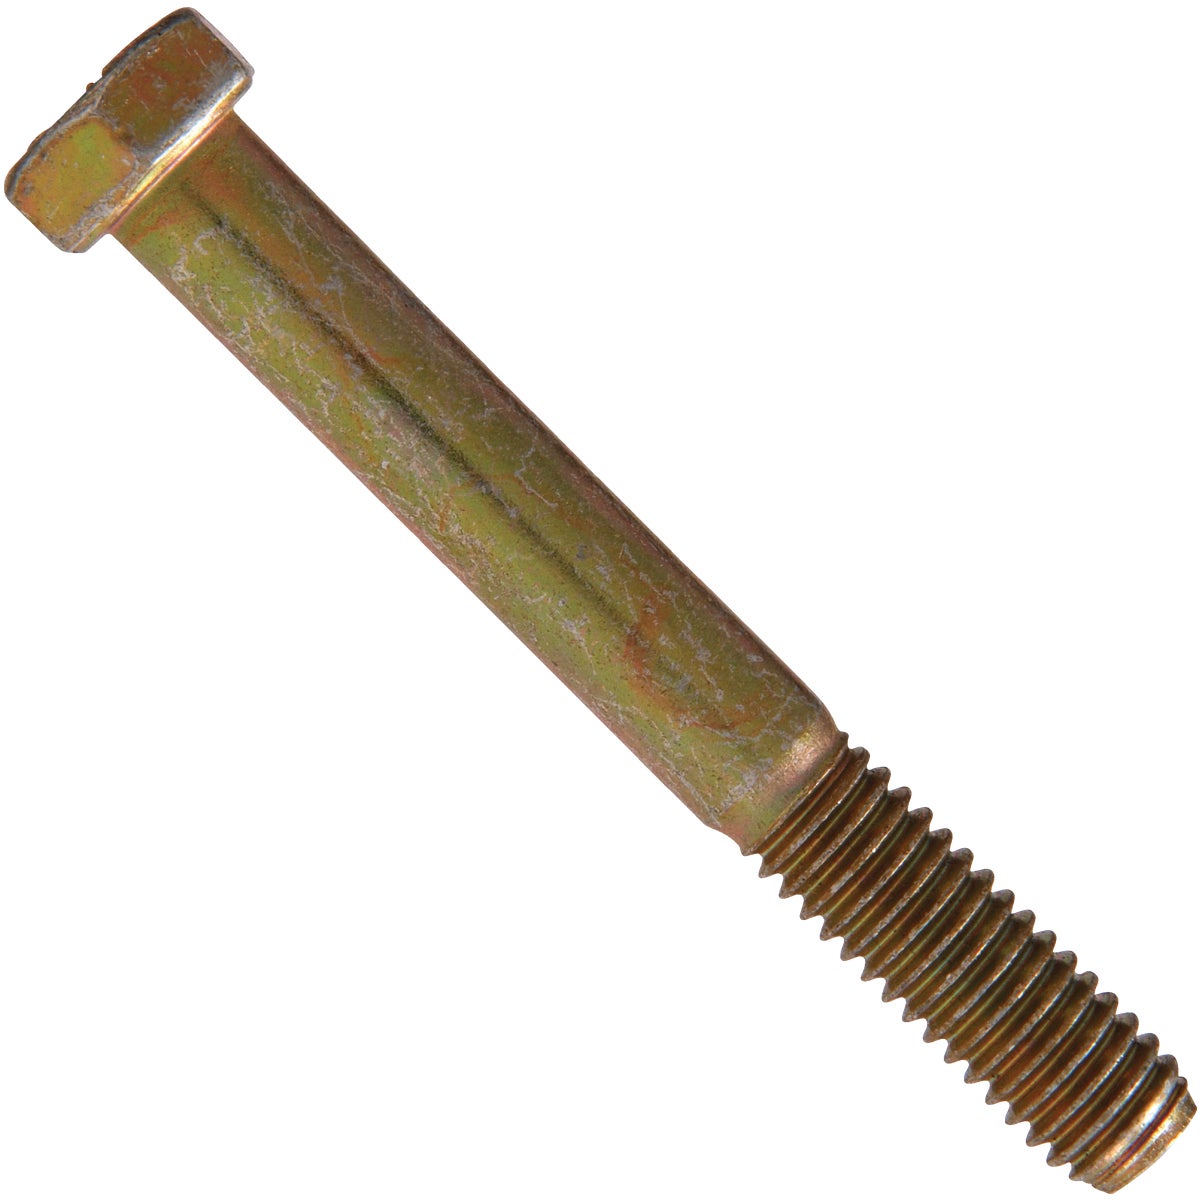 Item 742279, Hex Cap screws are bolts with hexagonal heads and machine threads for use 